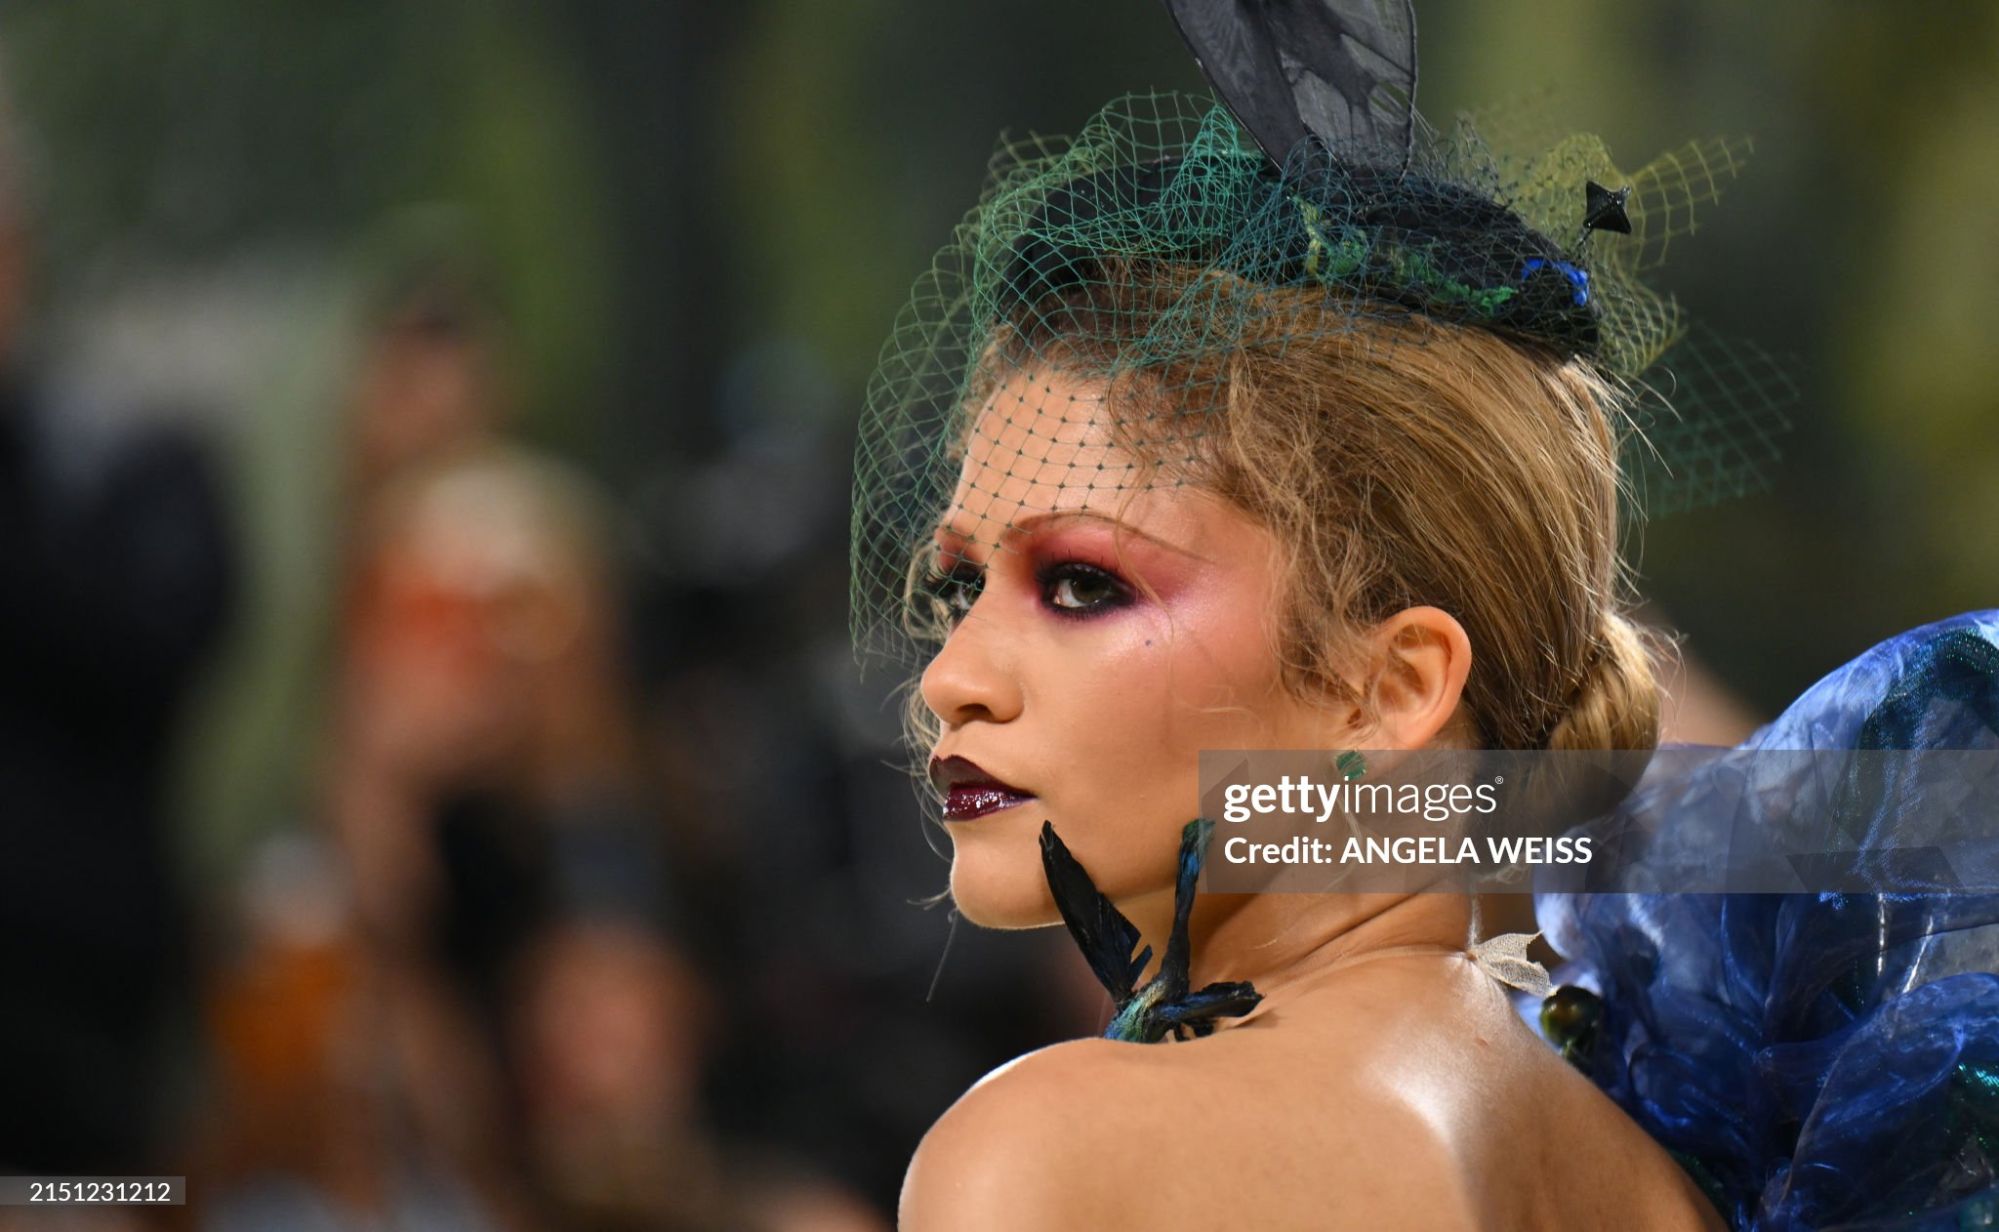 gettyimages-2151231212-2048x2048.jpg